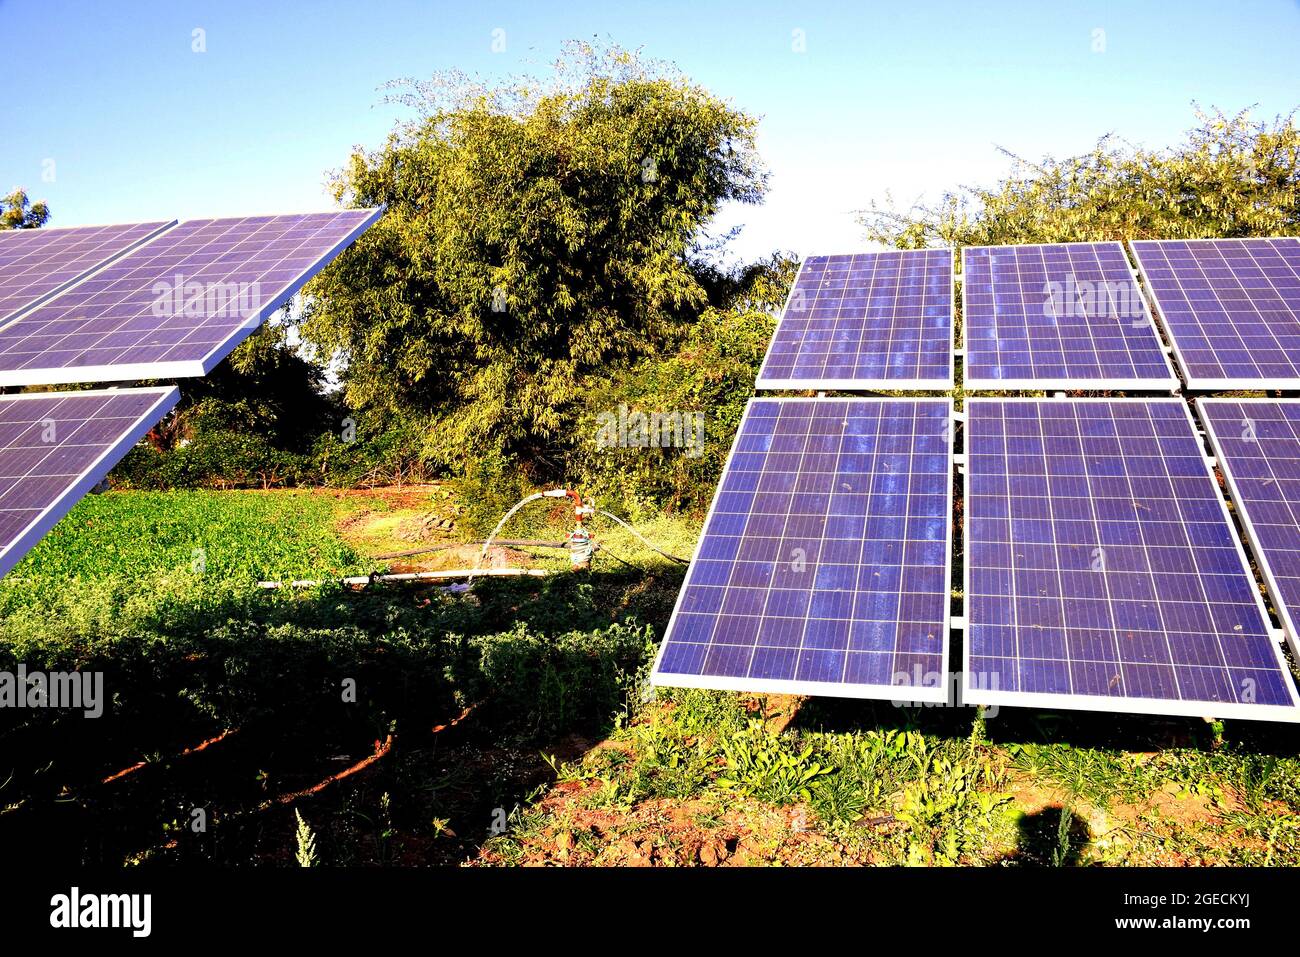 agricultural equipment for field irrigation, solar panel's, behind which is water jet. Stock Photo